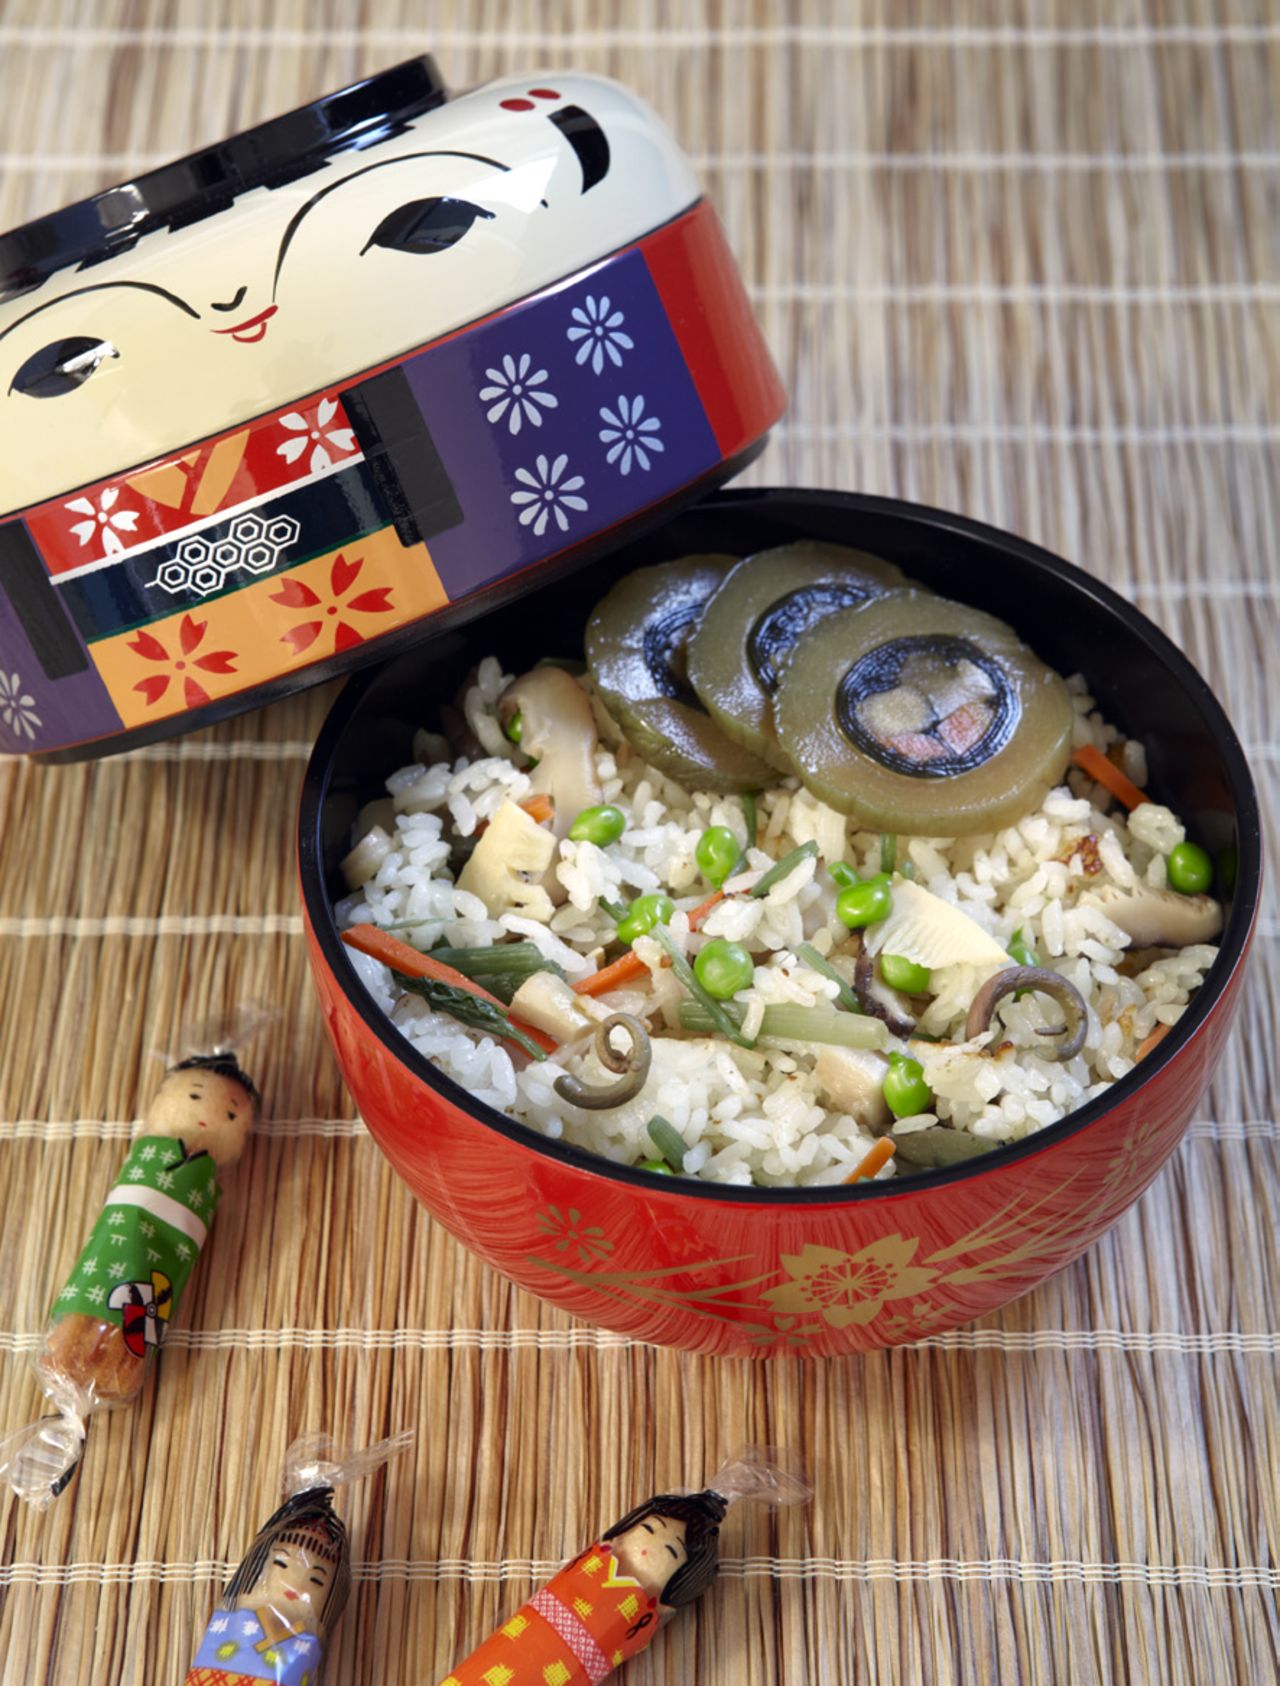 This fried tofu and mountain vegetable pilaf is served in a special kokeshi-shaped bento box. Kokeshi dolls are one of the most popular souvenirs in Tohoku.